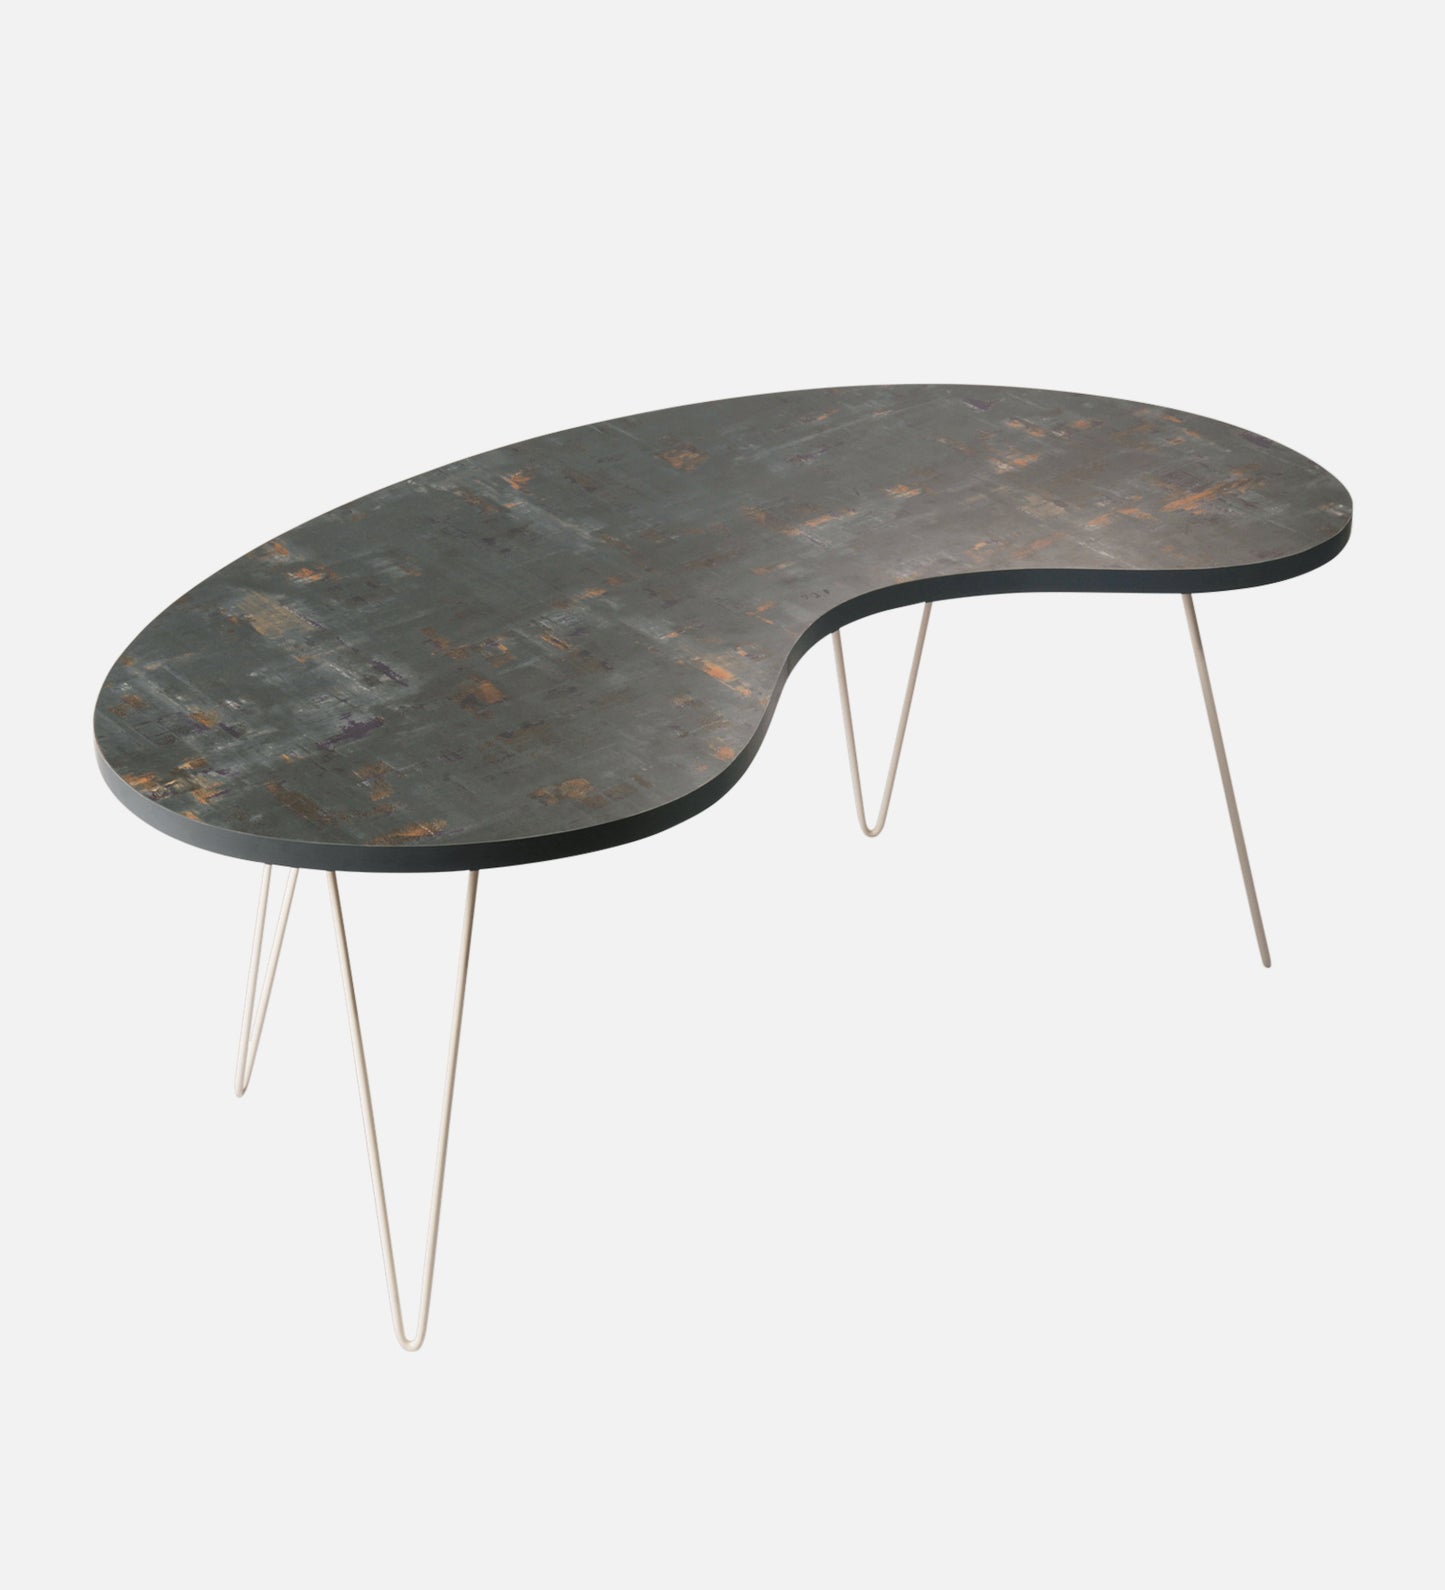 Bohemian Tint Bean Shape Coffee Tables, Wooden Tables, Coffee Tables, Center Tables, Living Room Decor by A Tiny Mistake